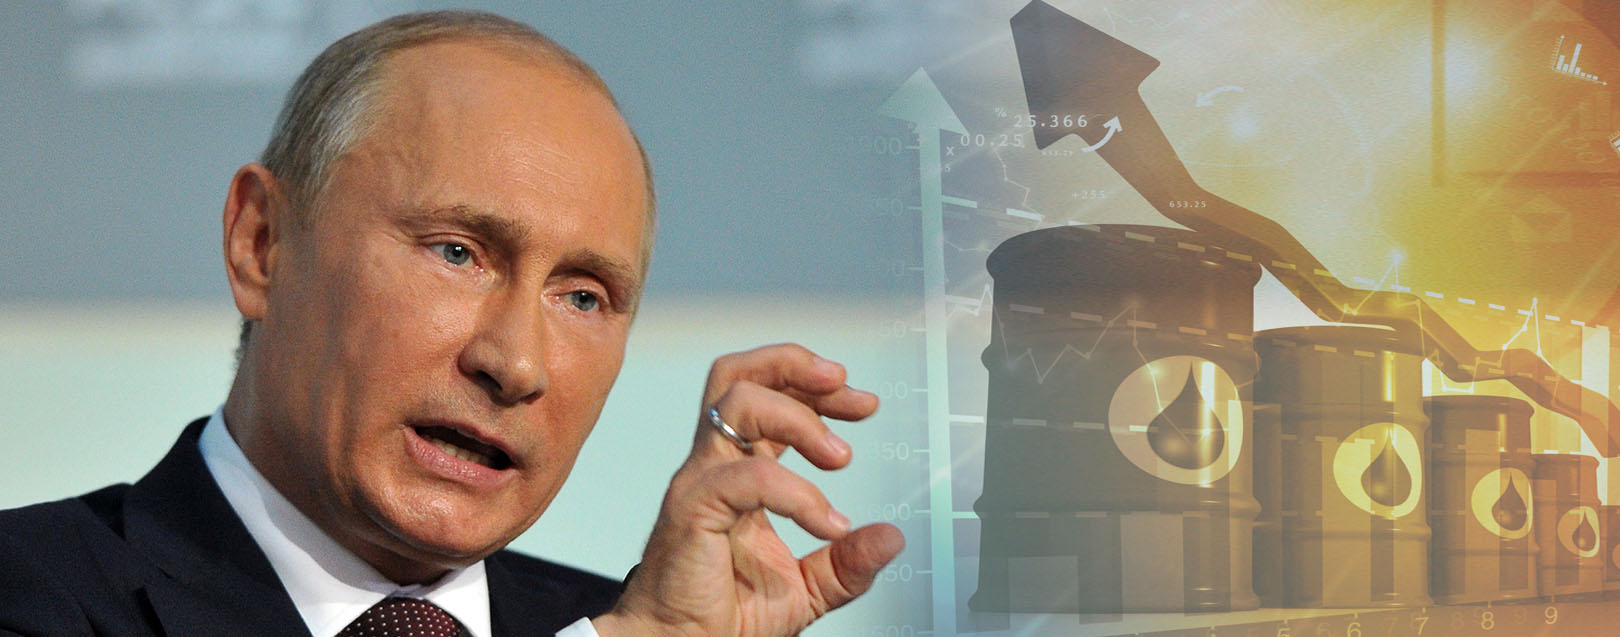 Oil prices surge after Putin remarks on freezing output